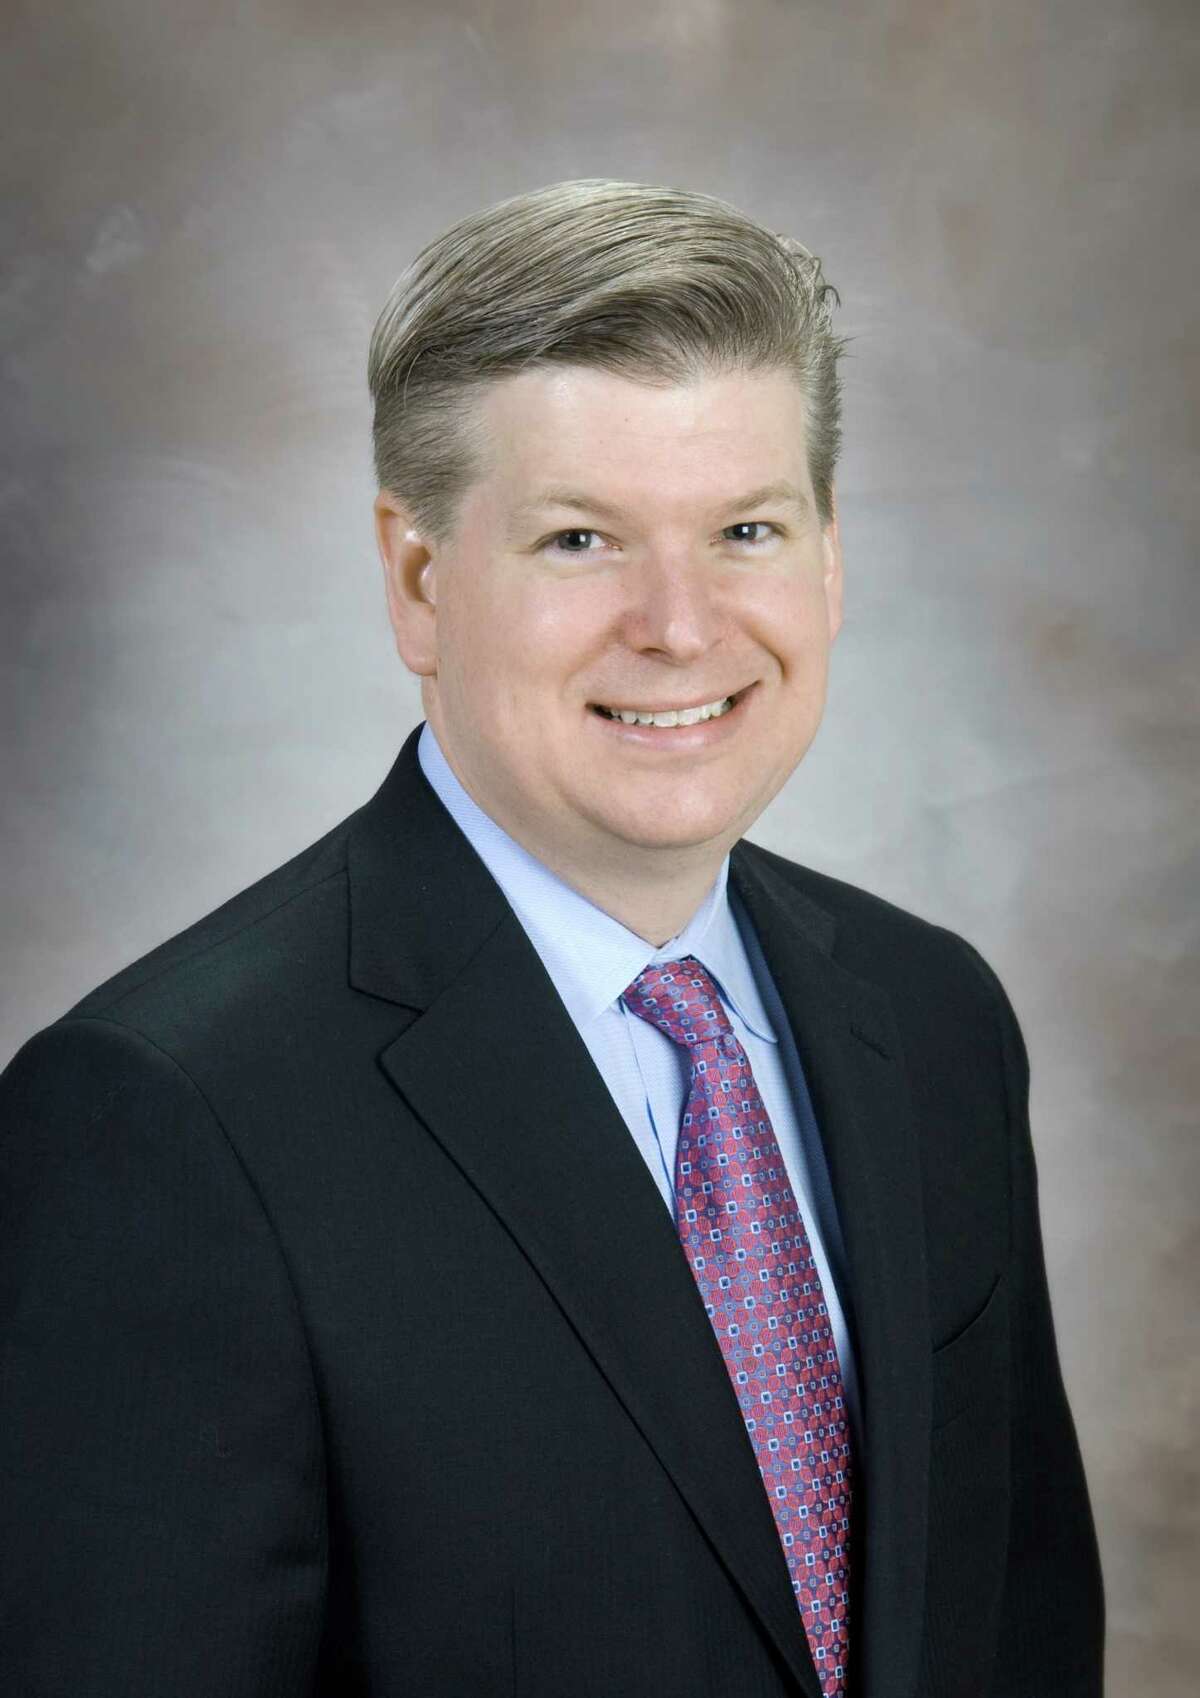 Dr. Erik Wilson is medical director of bariatric surgery at Memorial Hermann Texas Medical Center and Chief of Elective General Surgery for the University of Texas Health Science Center at Houston.